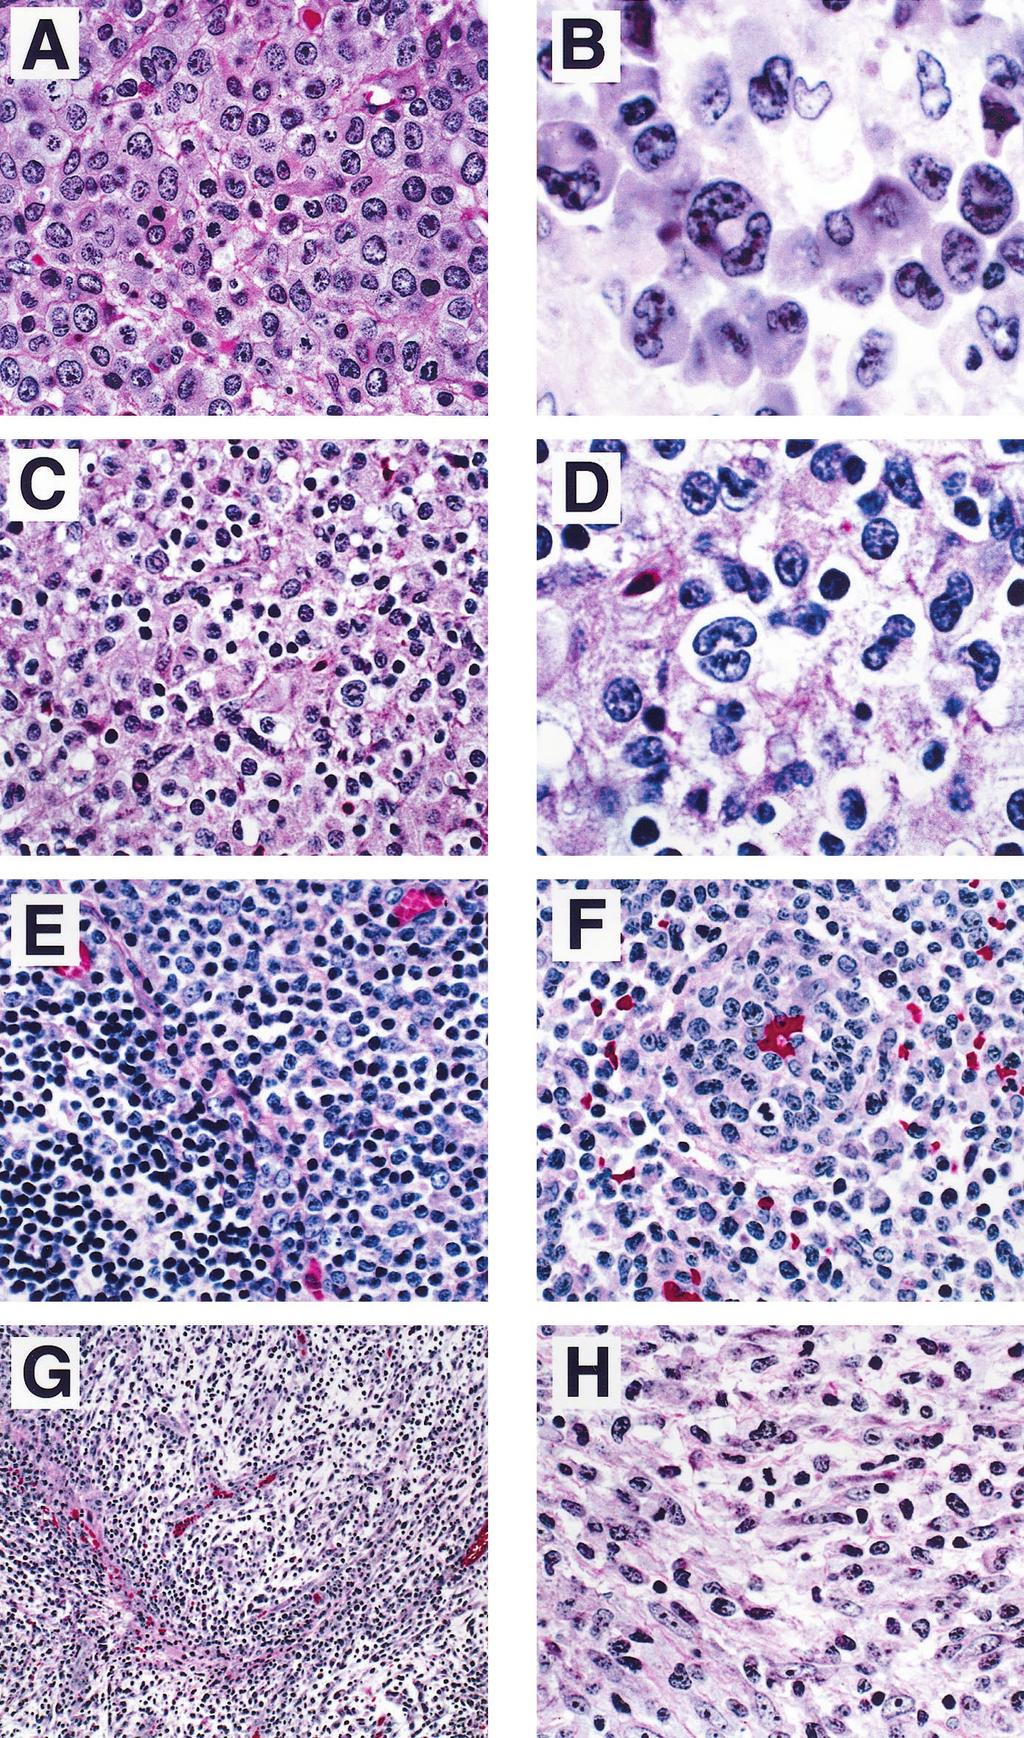 FIGURE 2. Histologic spectrum of ALCL. A, Cells are large with abundant amphophilic cytoplasm and distinct cytoplasmic borders. A cohesive growth pattern is present.